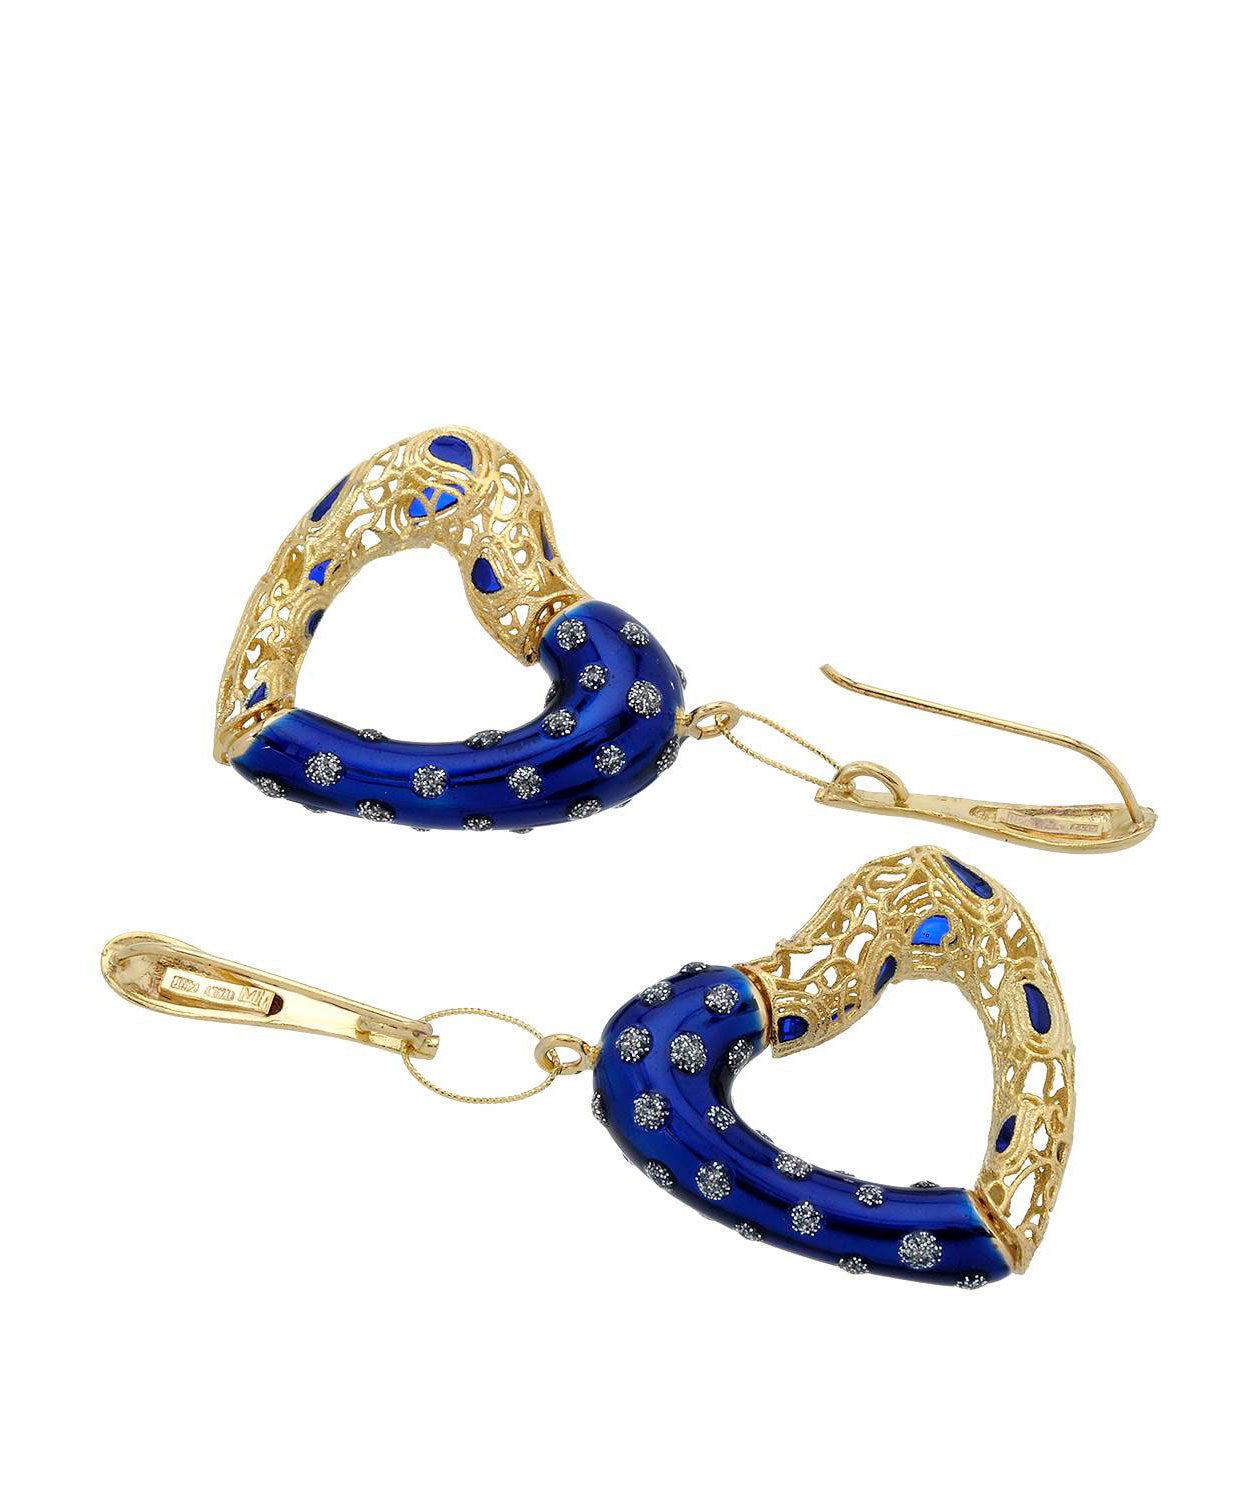 Patterns of Love Collection 14k Gold & Enamel Heart Dangle Earrings - Made in Italy View 2